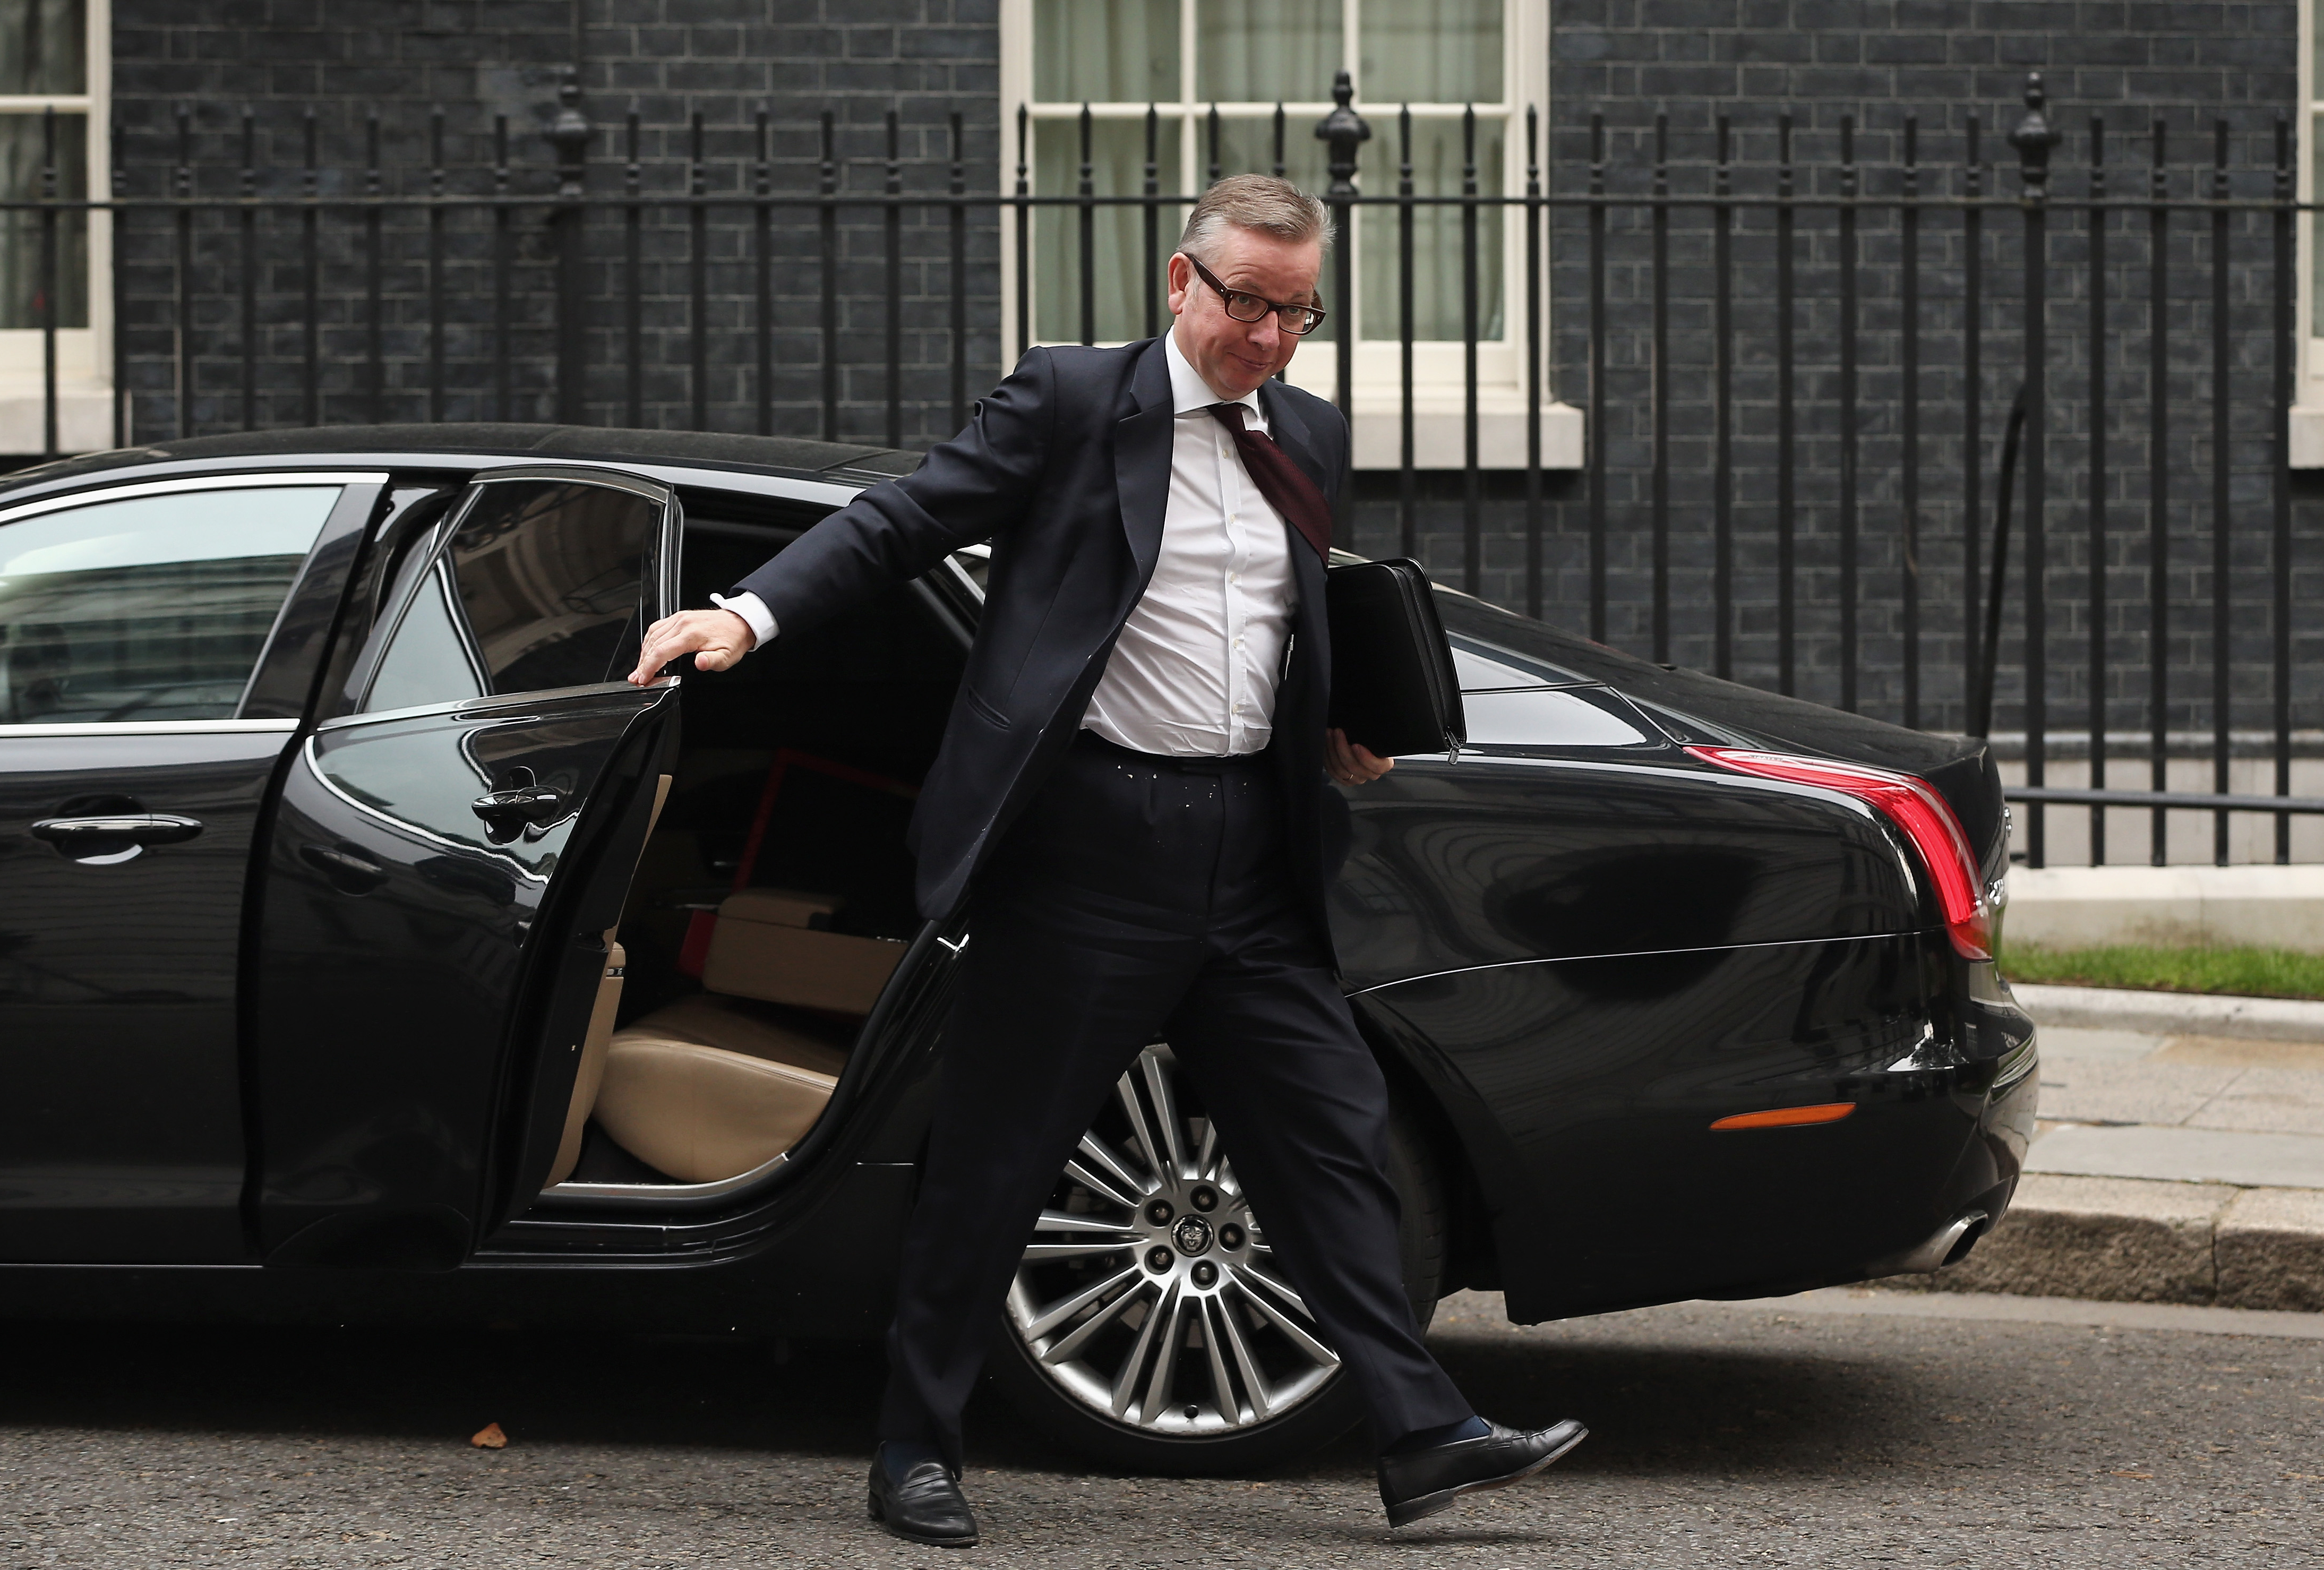 Education Secretary Michael Gove is called in to Downing Street